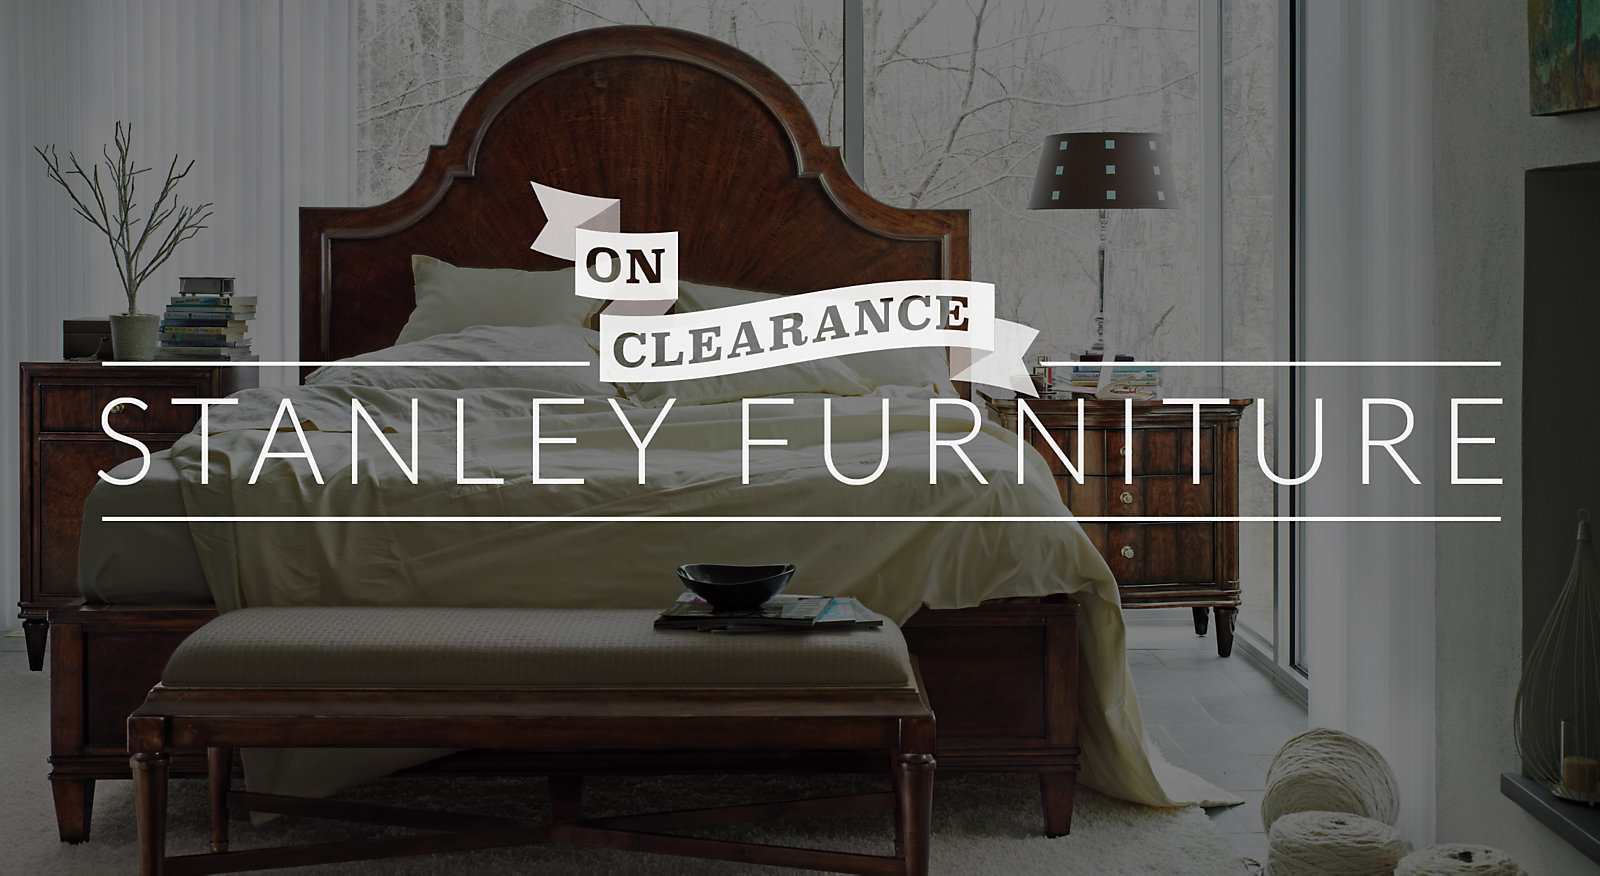 Stanley Furniture sales continue to slide with troubled Vietnam factory | Woodworking Network